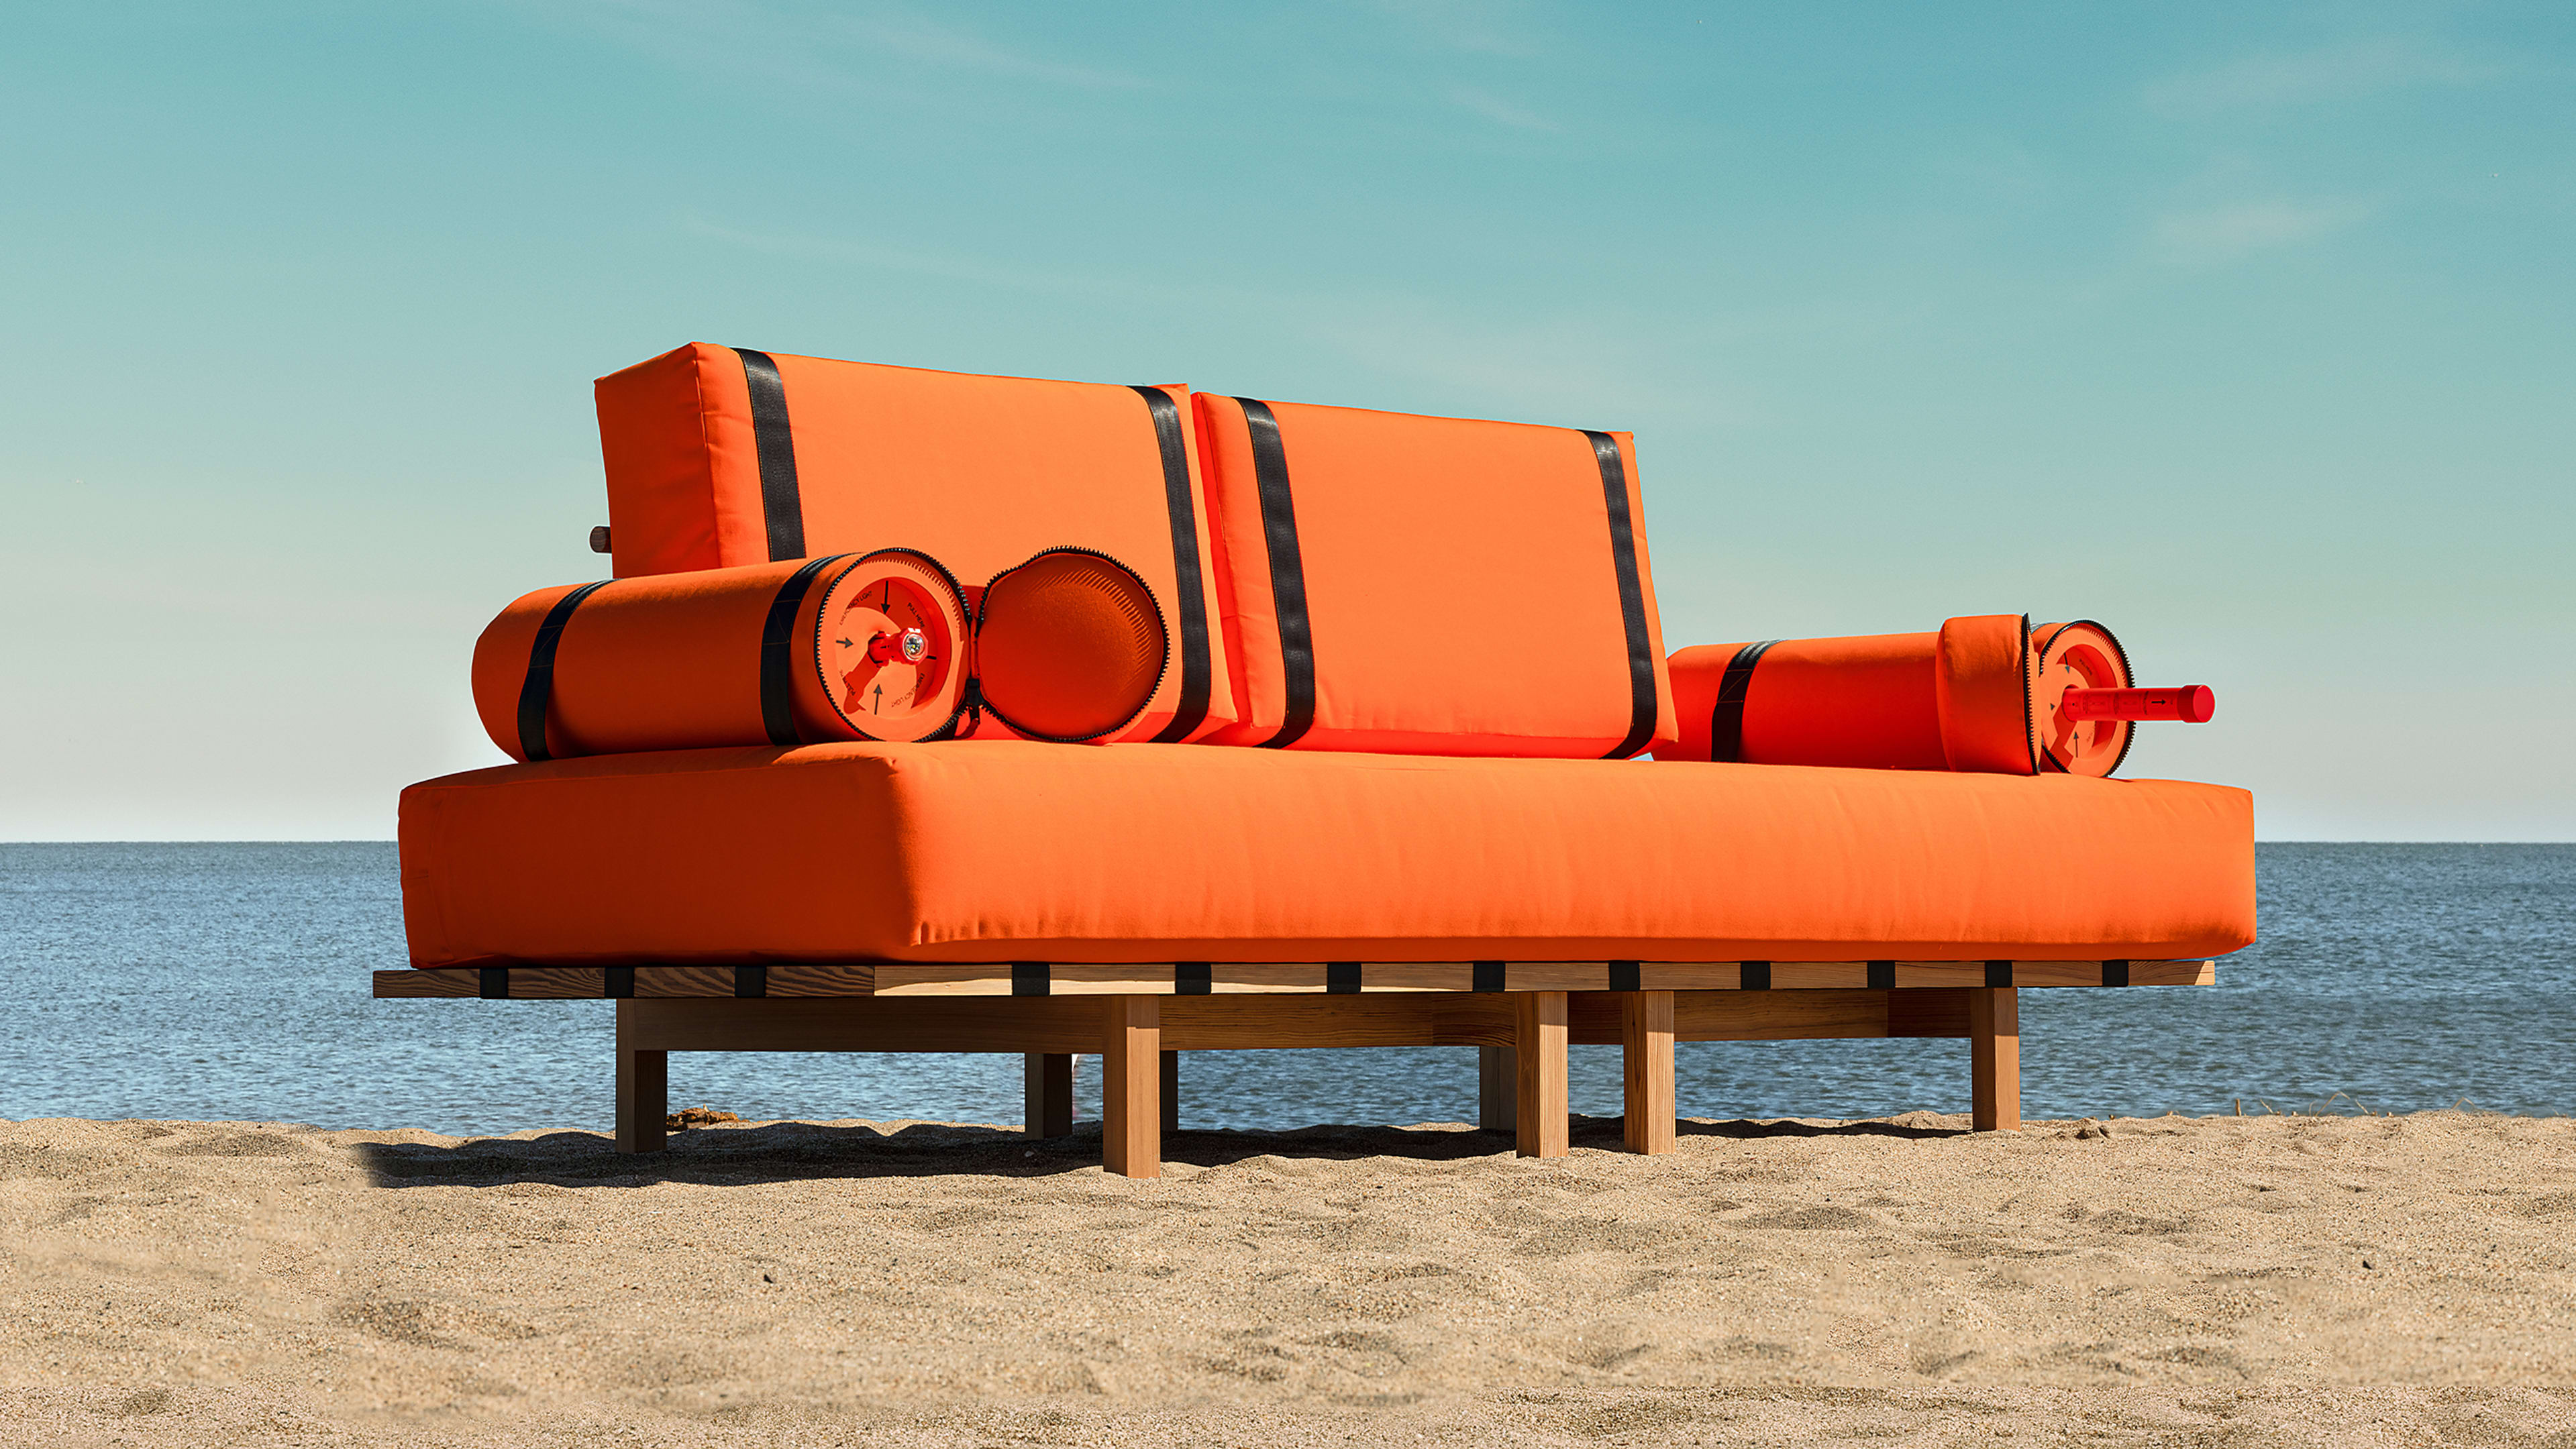 This $100,000 floating sofa doubles as a life raft